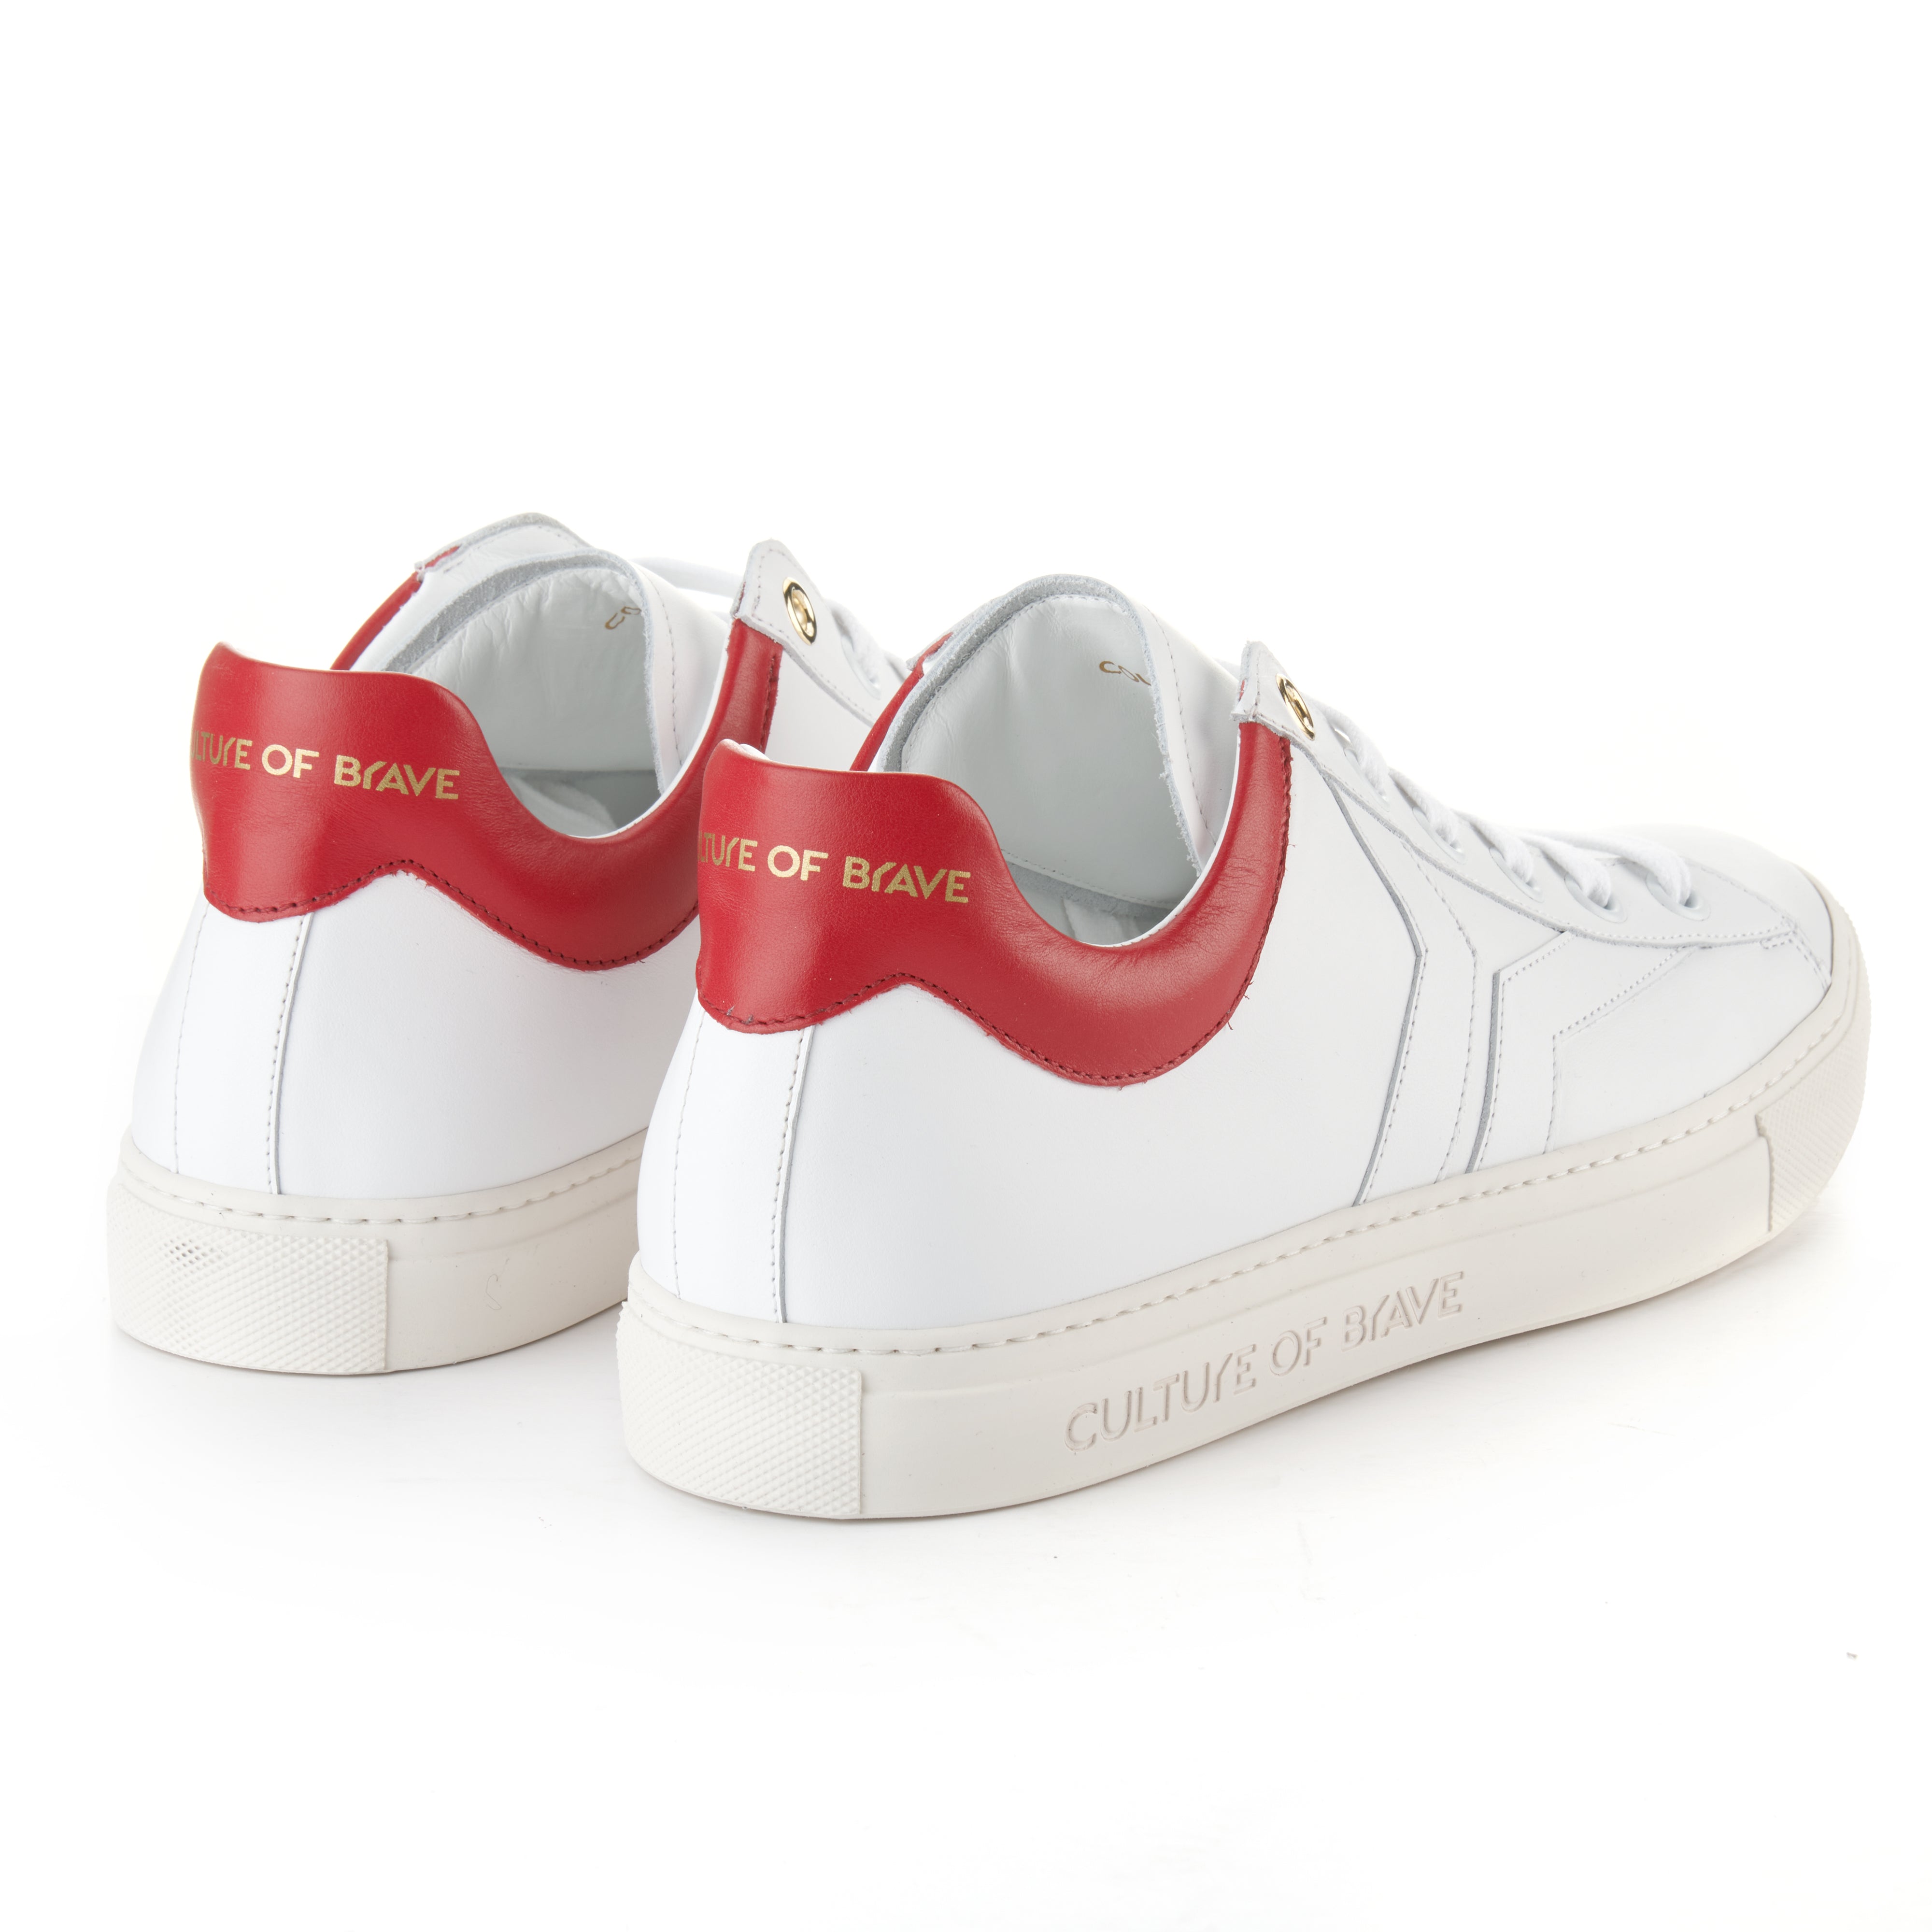 Courage S28 Women White leather red ankle low cut